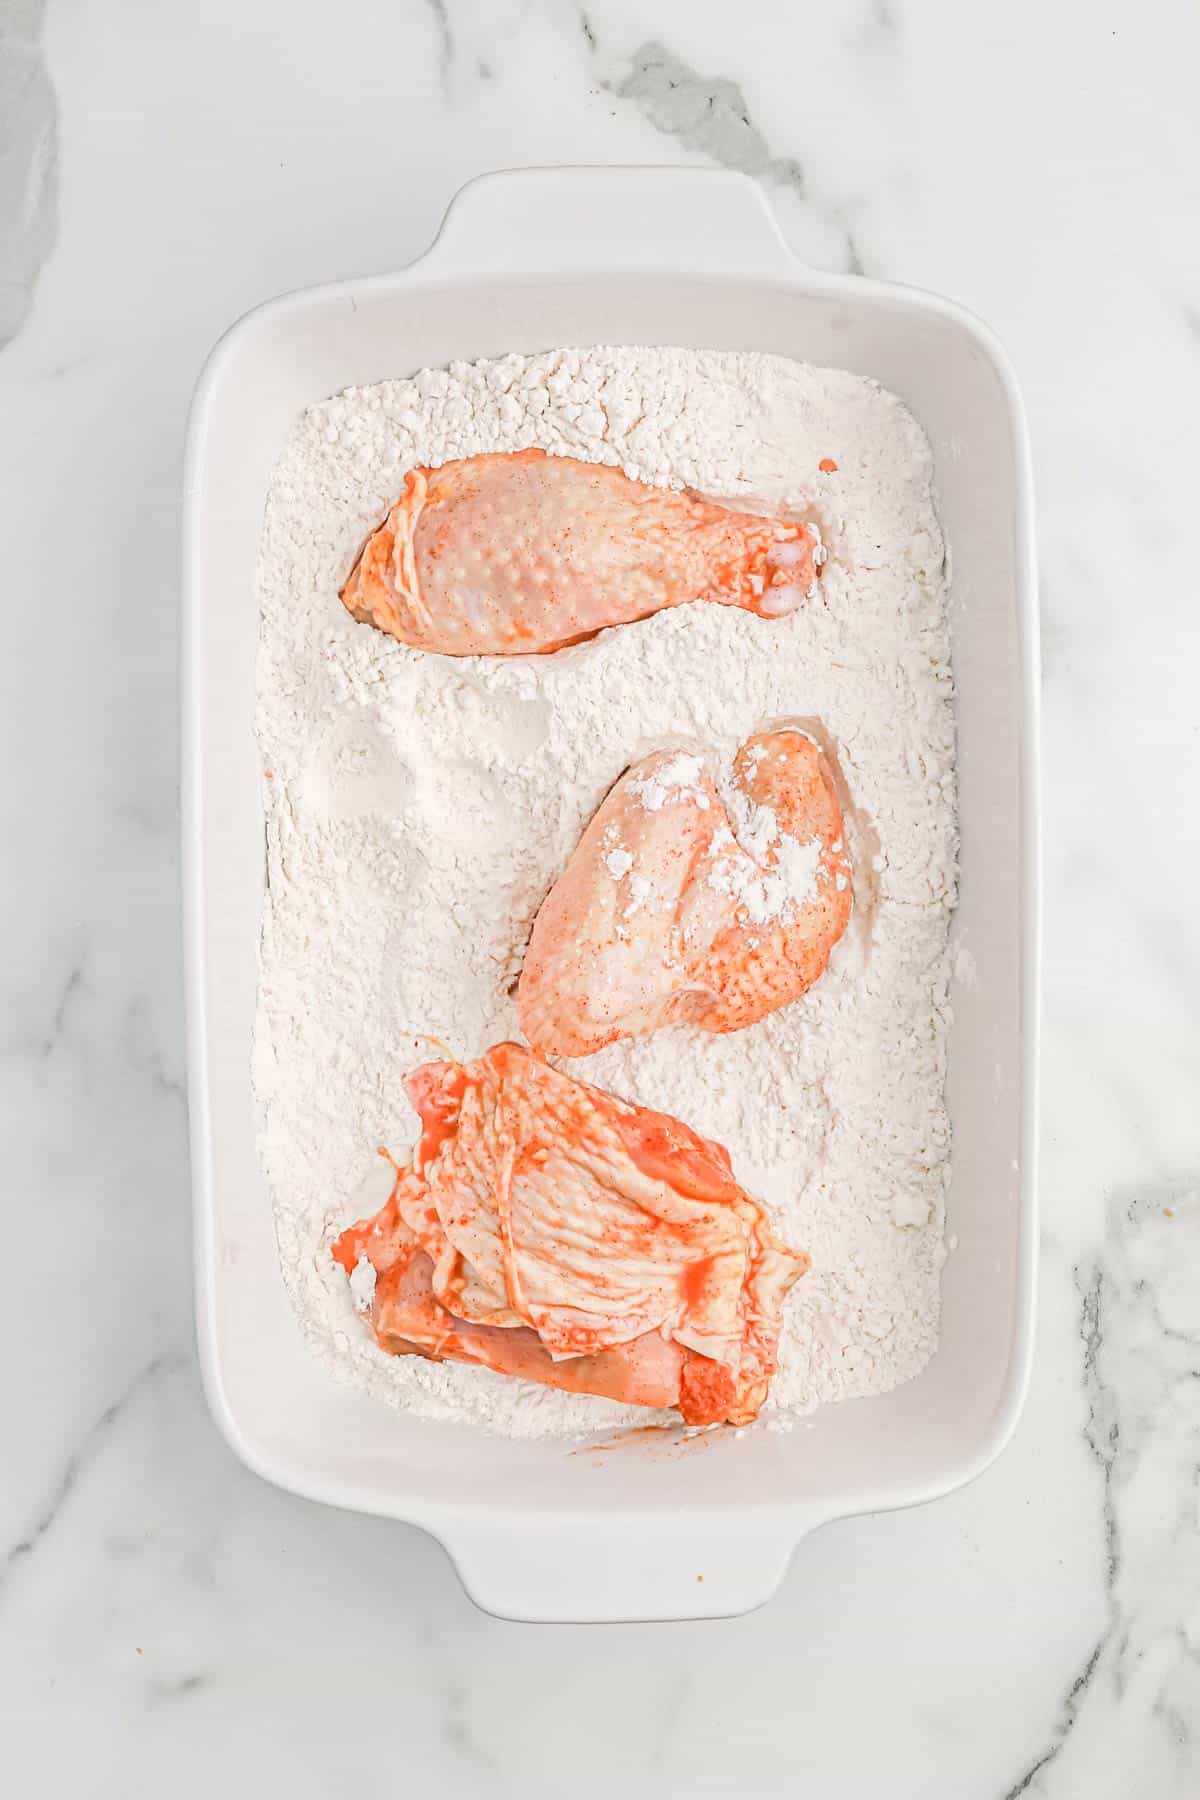 Brined chicken pieces in a dish with flour mixture.